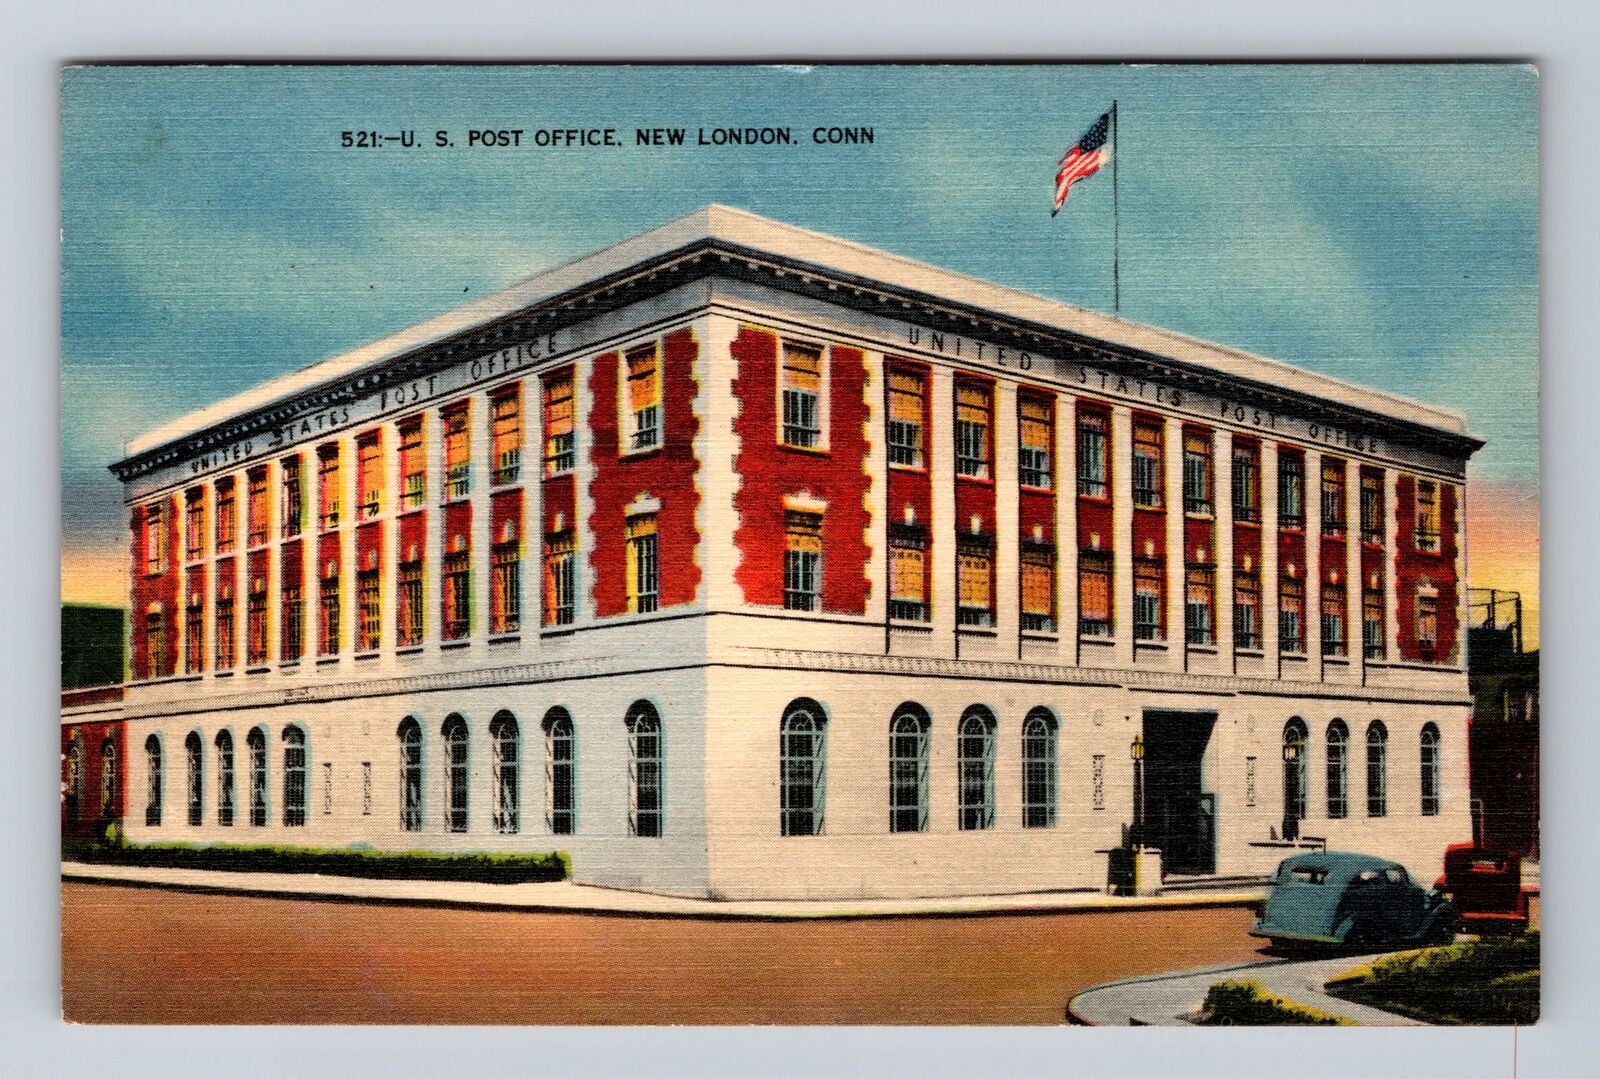 New London CT-Connecticut, United States Post Office, Vintage c1952 Postcard